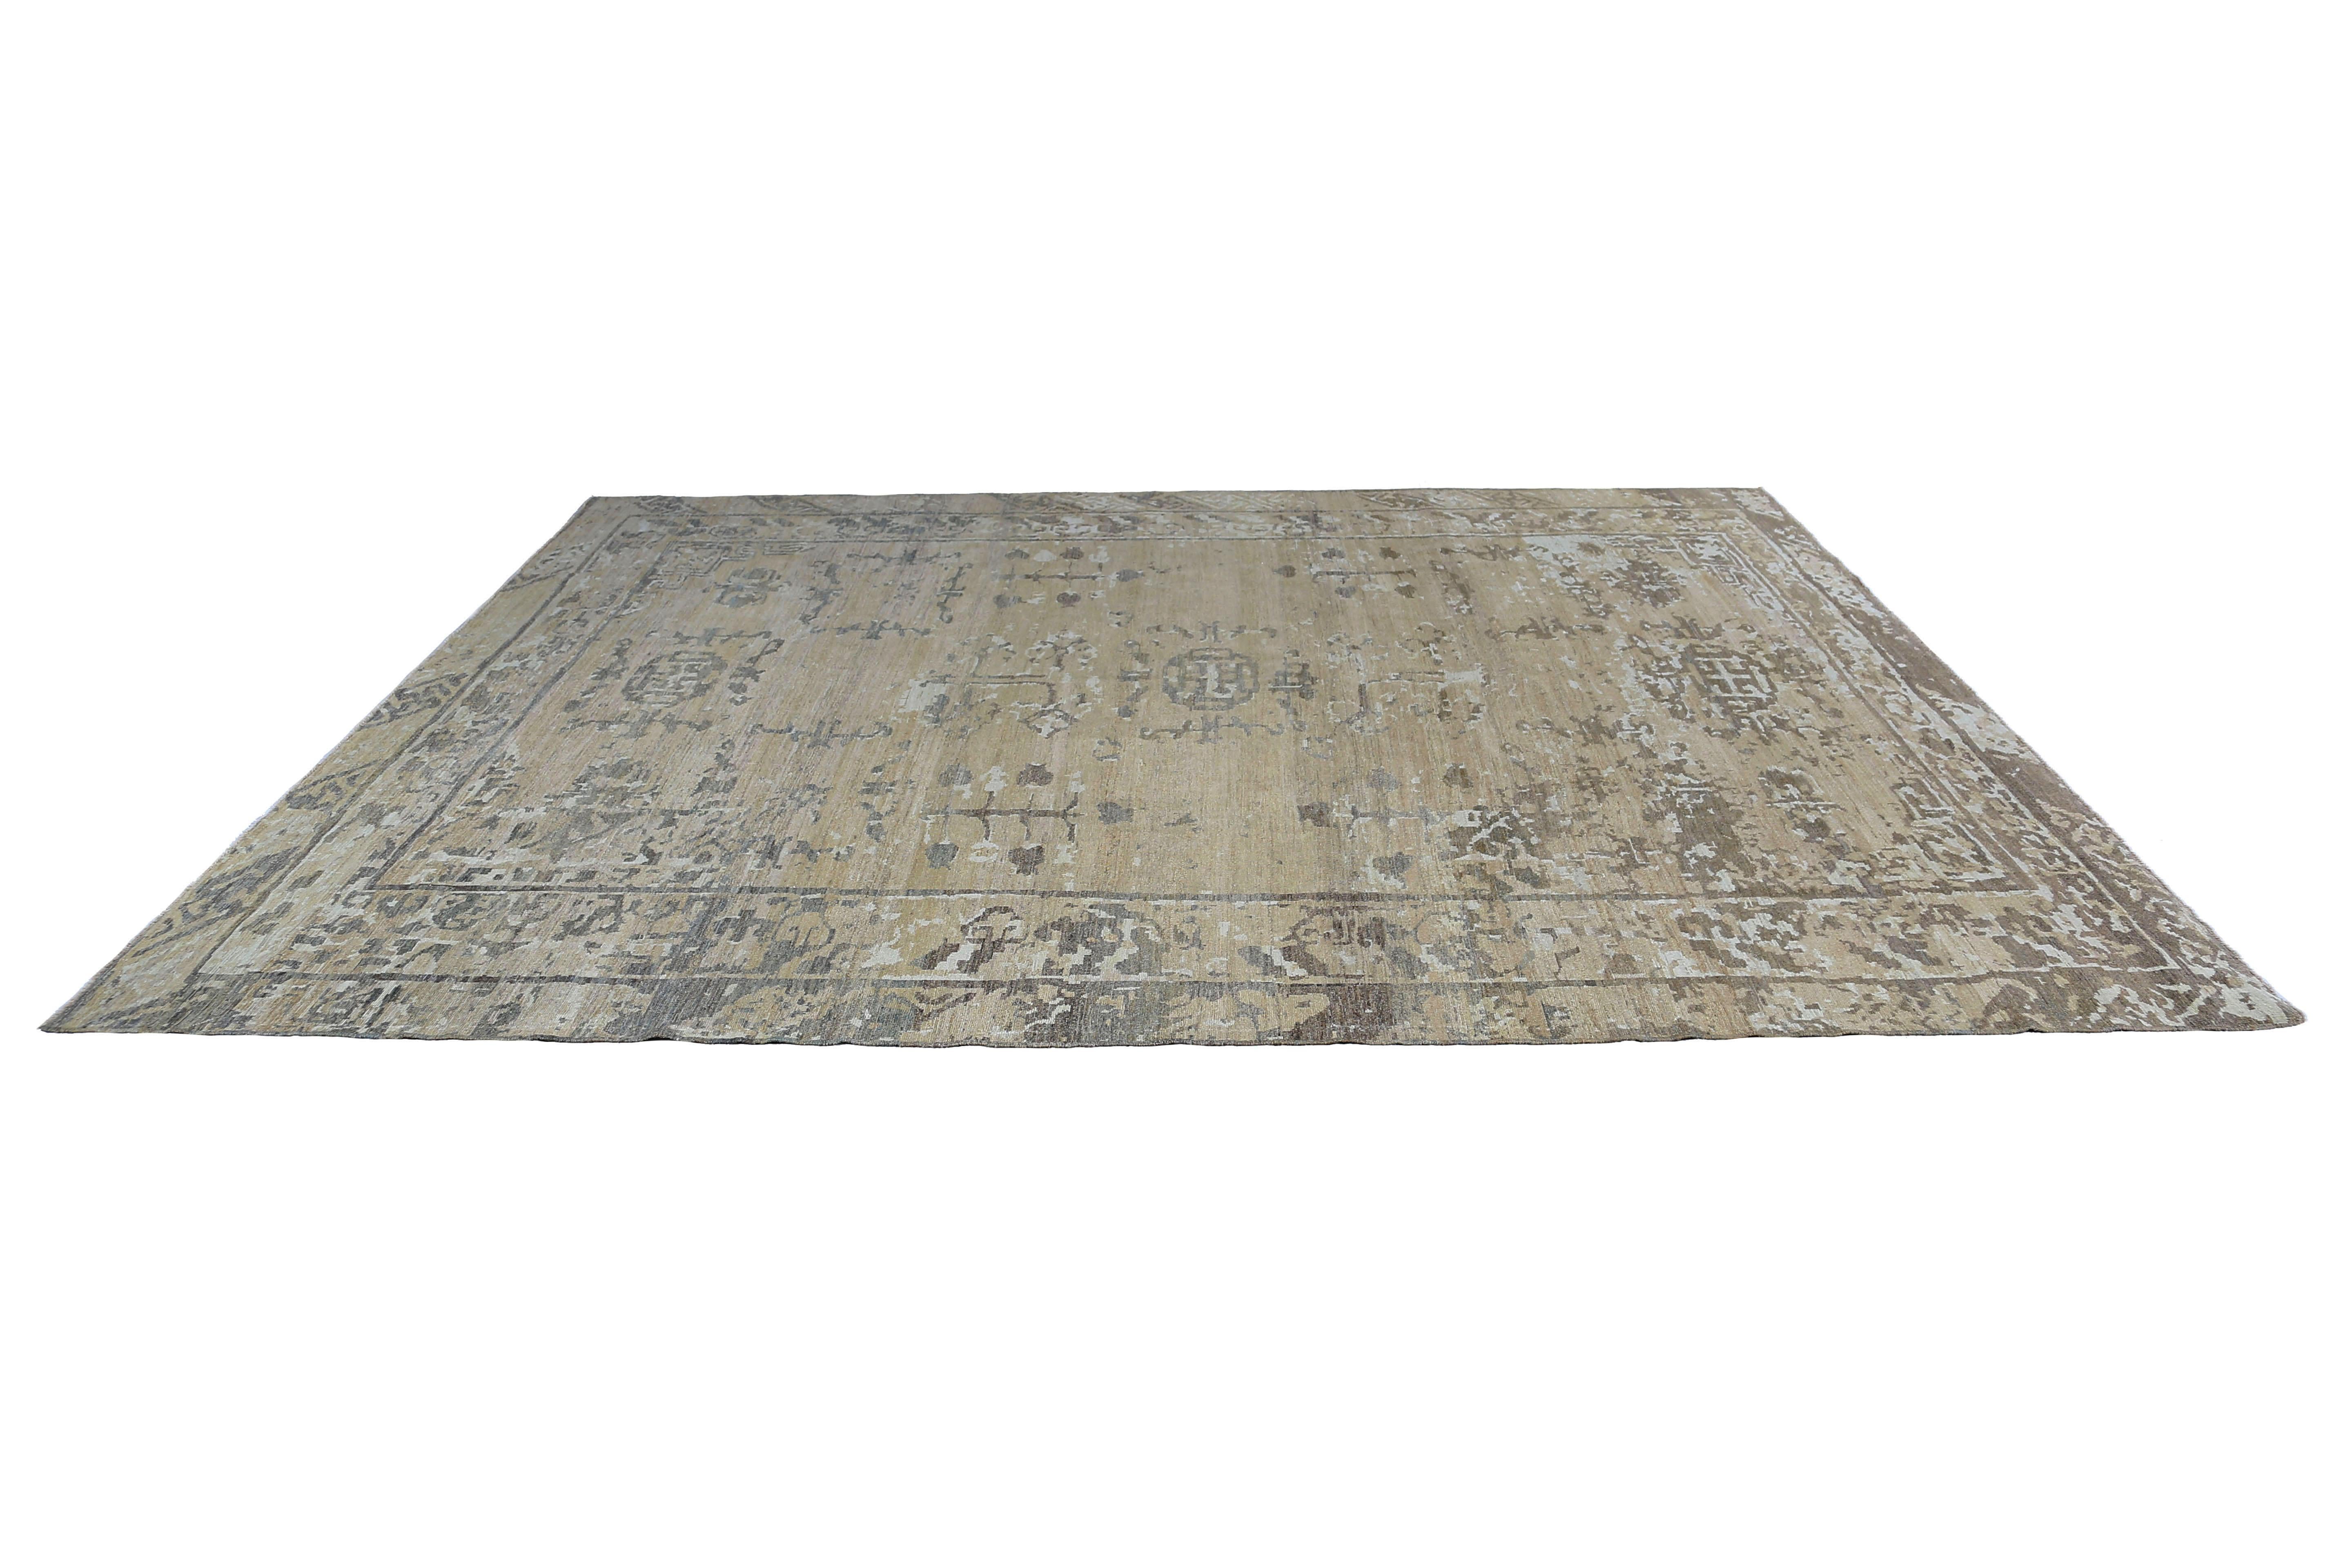 Our Turkish Sultanabad rug in the size of 12'3'' x 15'9'' is a beautiful and versatile piece that will complement any decor. Handcrafted by skilled artisans using natural wool fibers, this rug has a soft and luxurious texture that adds warmth and